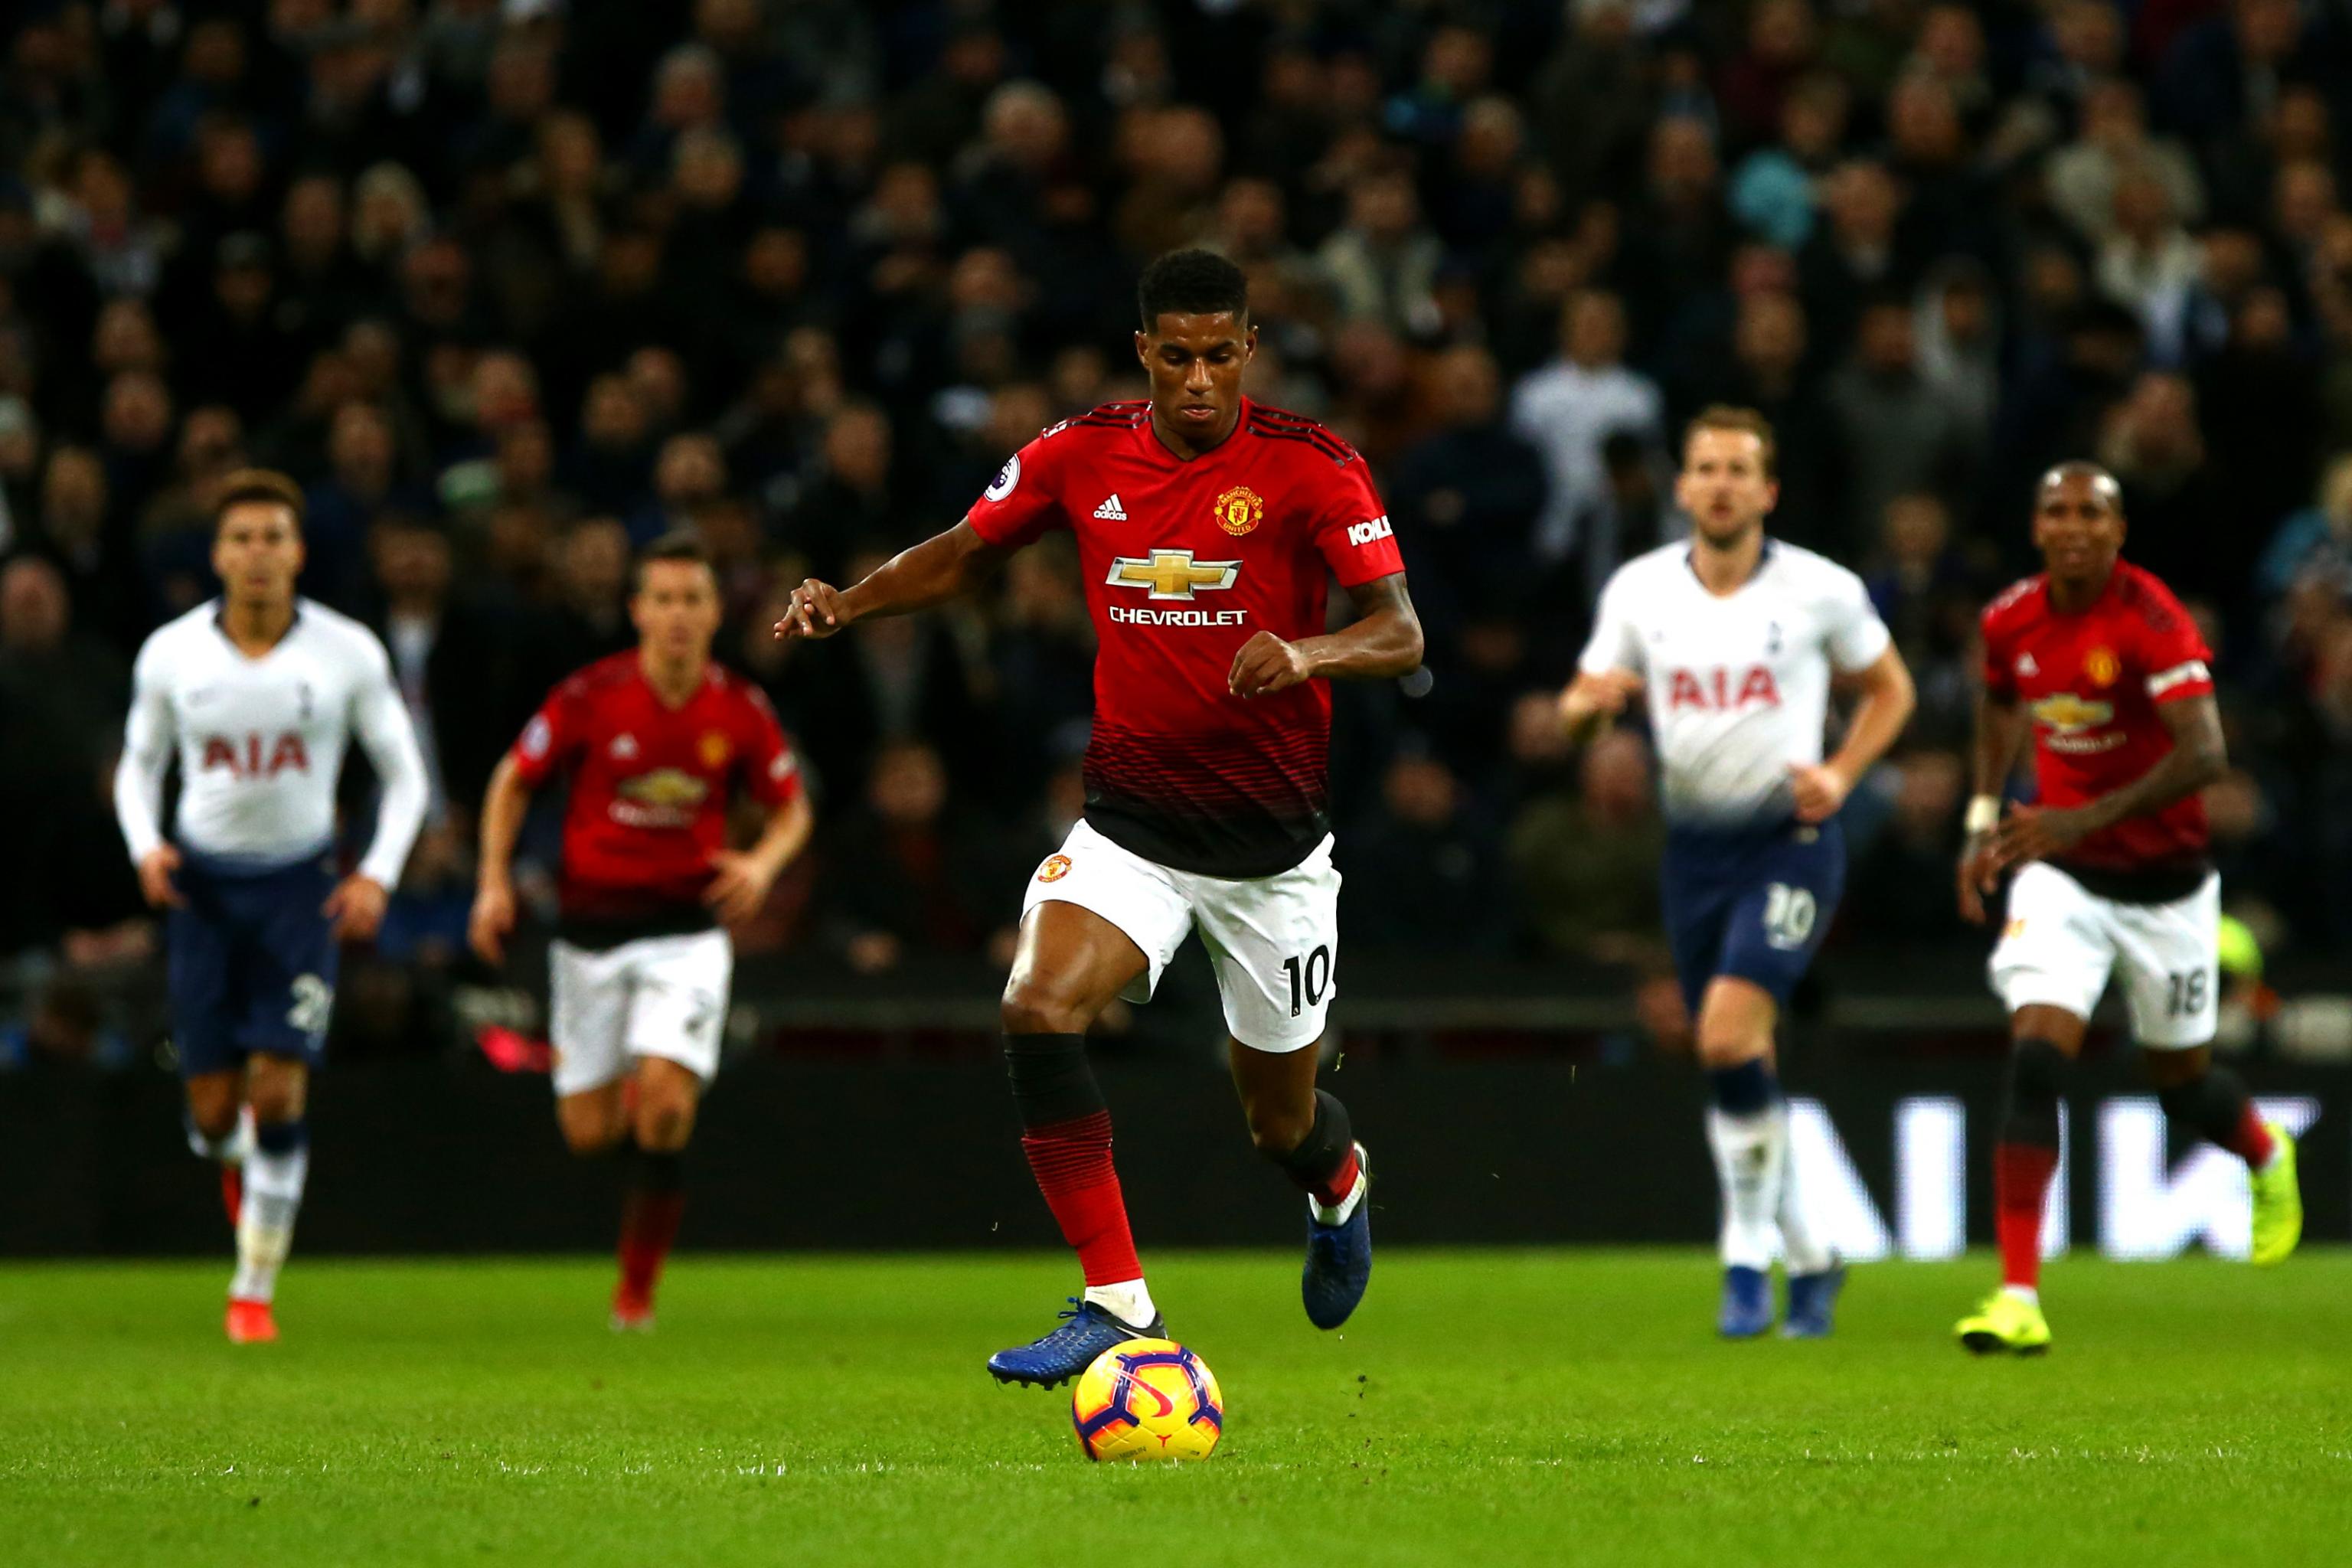 Tottenham Vs Manchester United 2019 Icc Odds Tv Schedule And Live Stream Bleacher Report Latest News Videos And Highlights